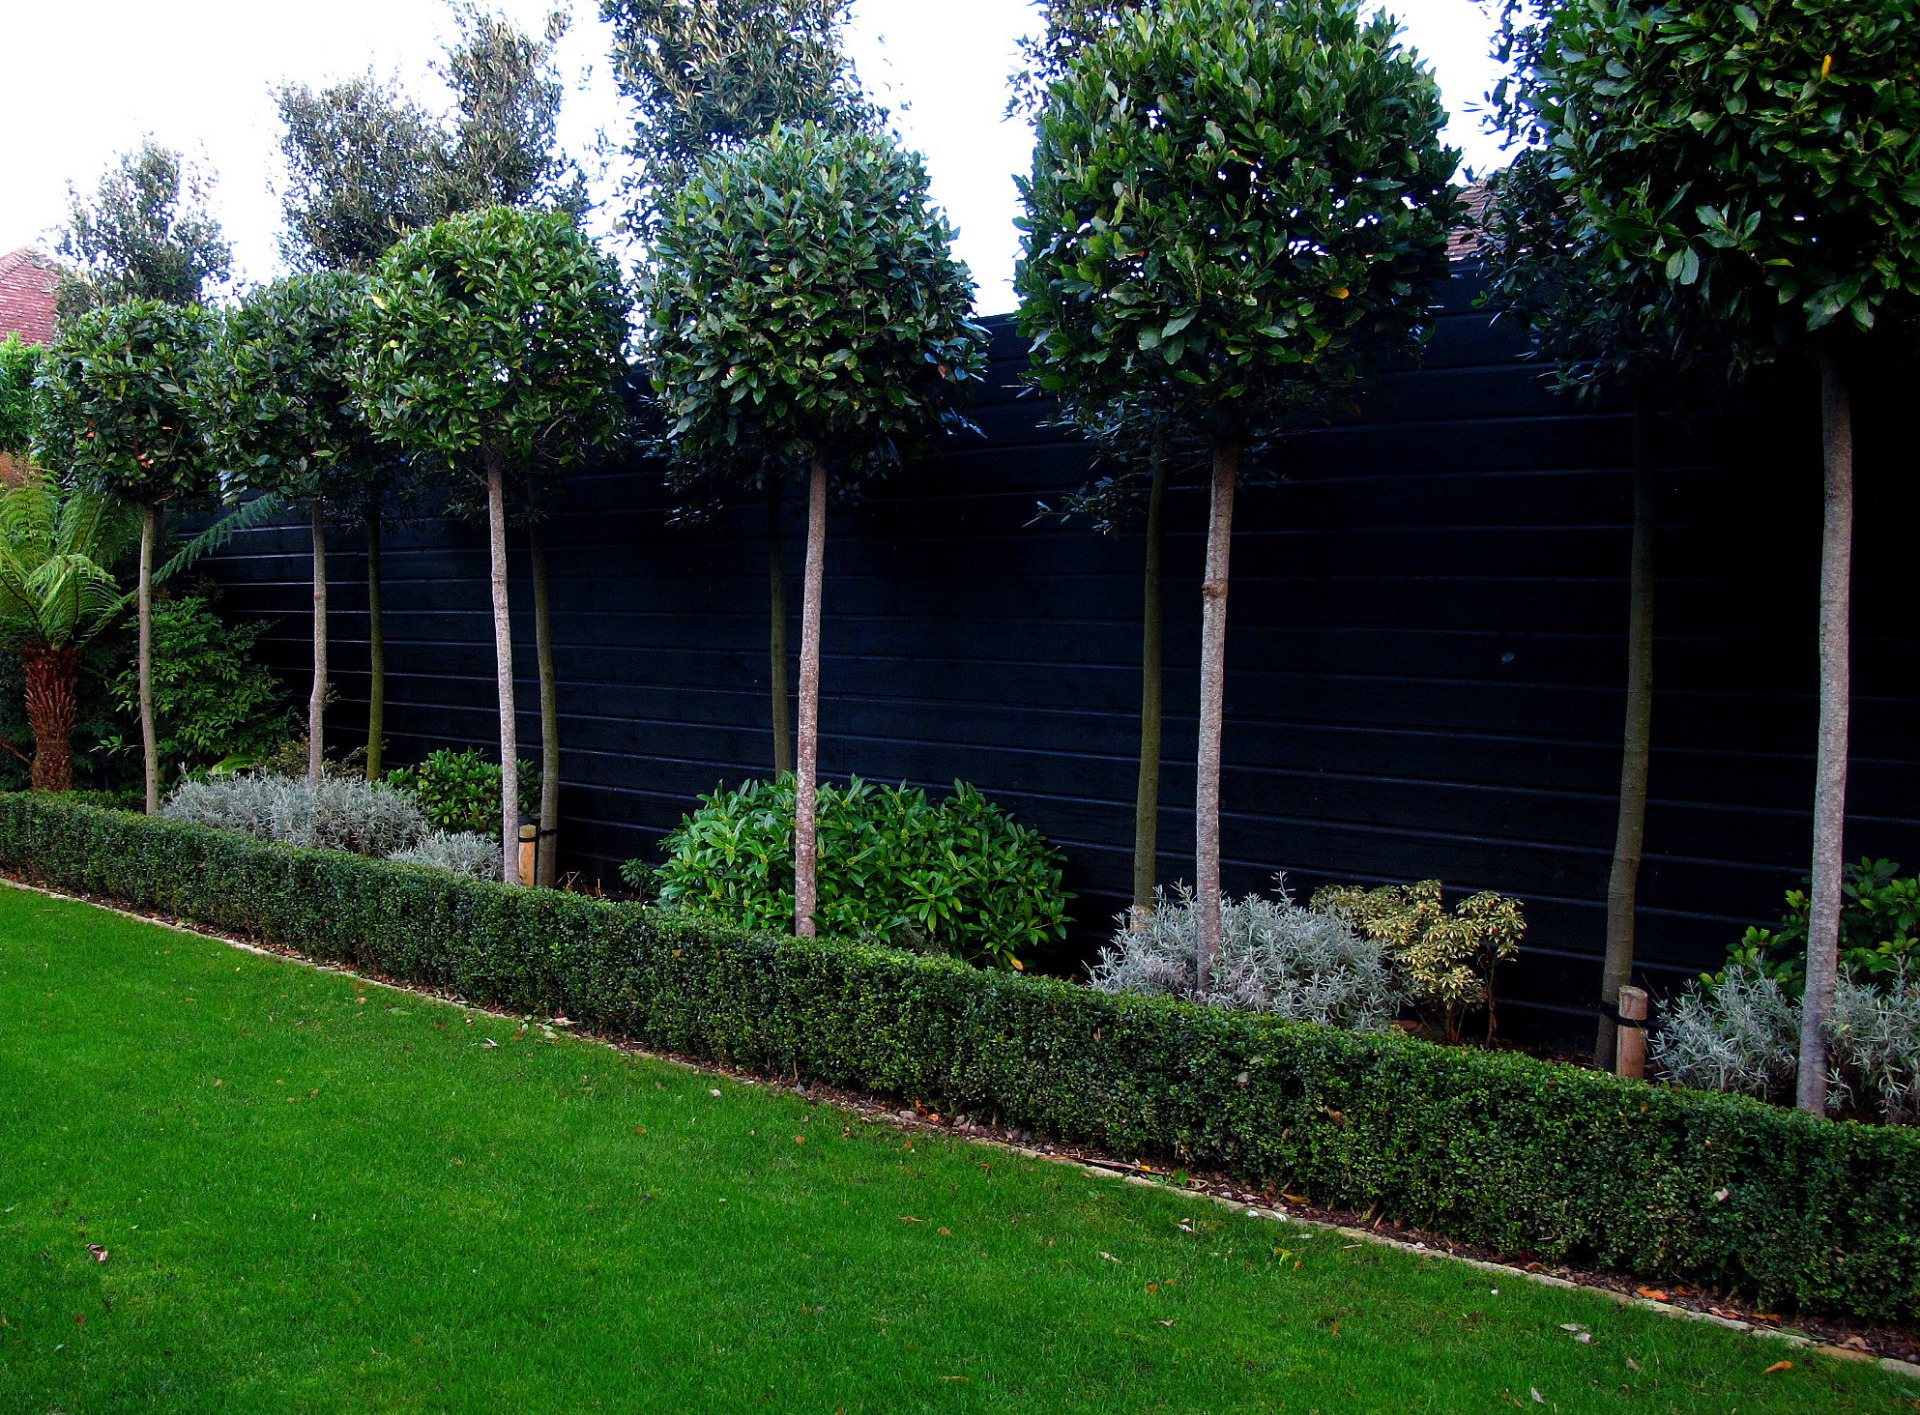 Bespoke Shiplap Garden Fencing with painted finish | Supplied + installed by Owen Chubb Garden Landscapers